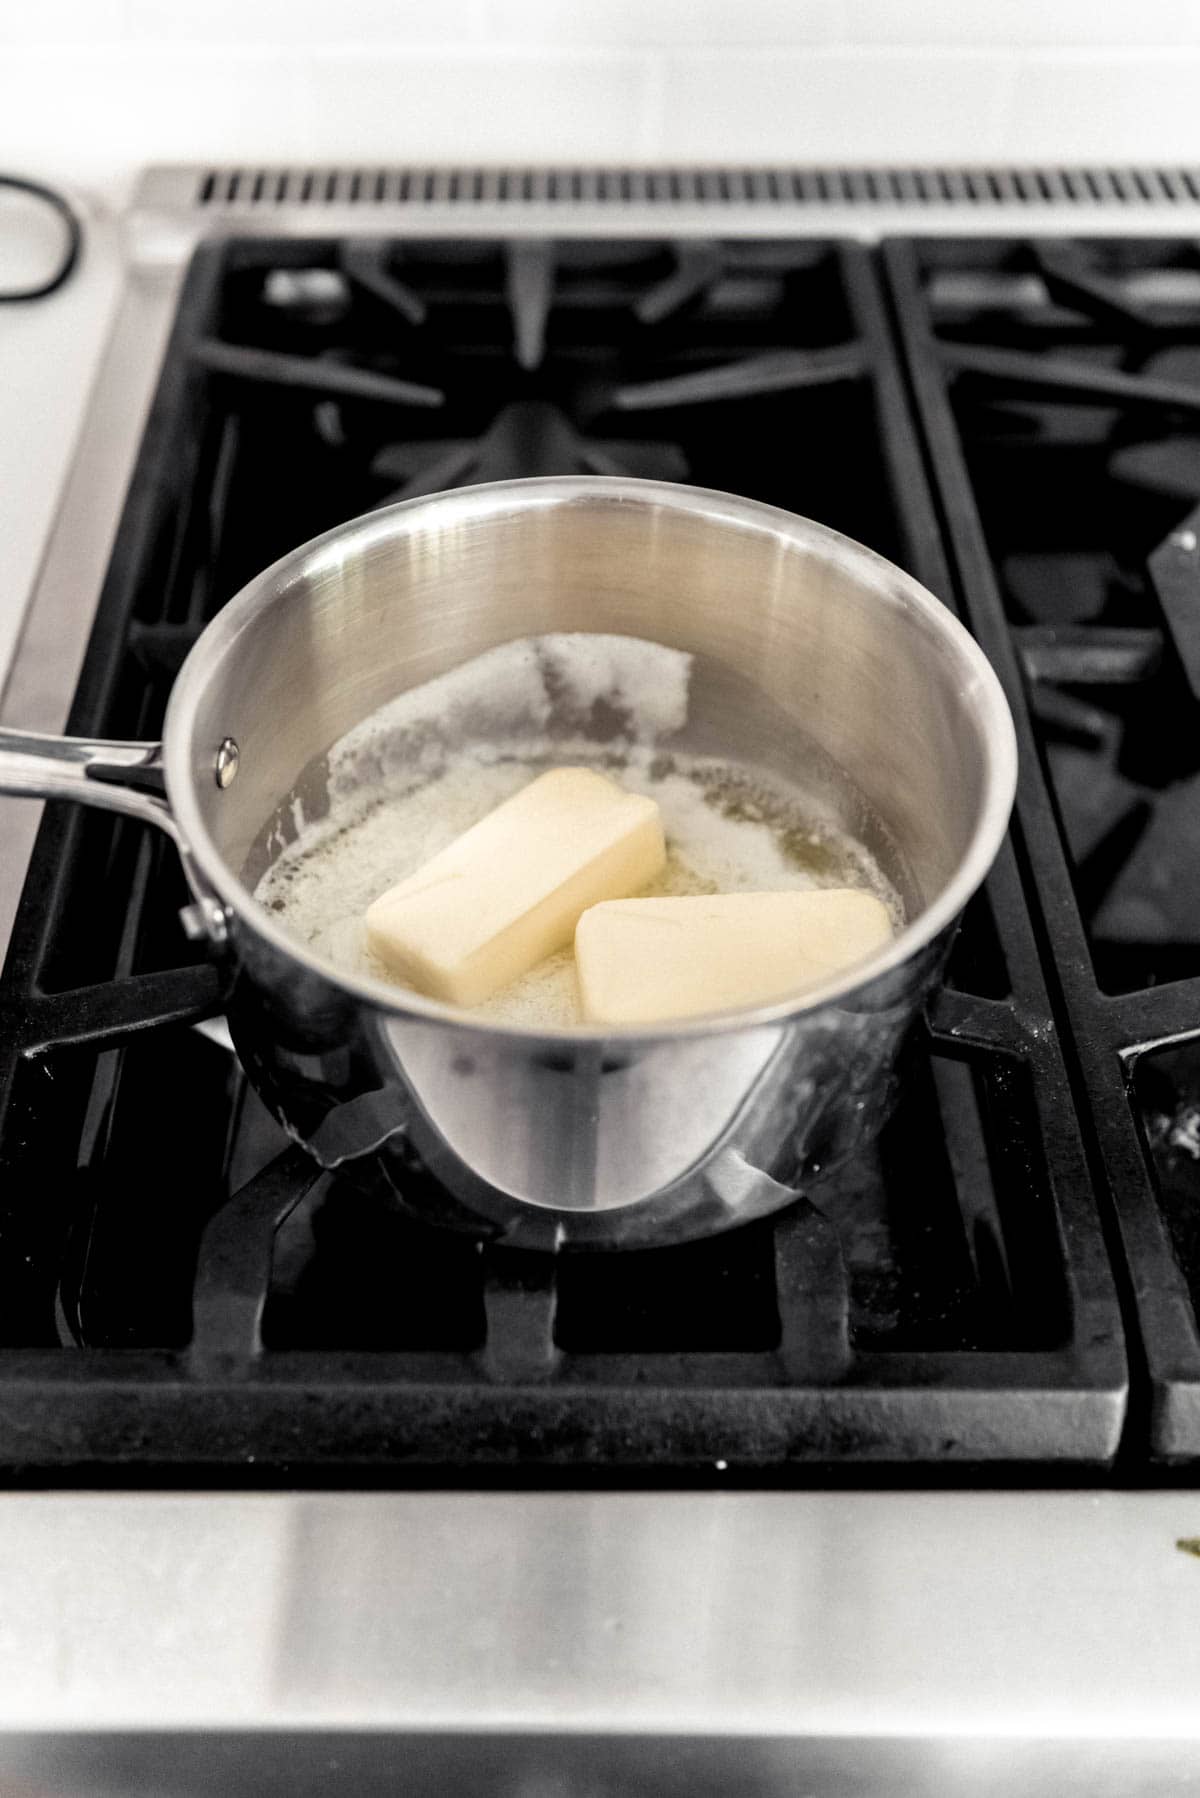 Melting butter in a saucepan on the stove.